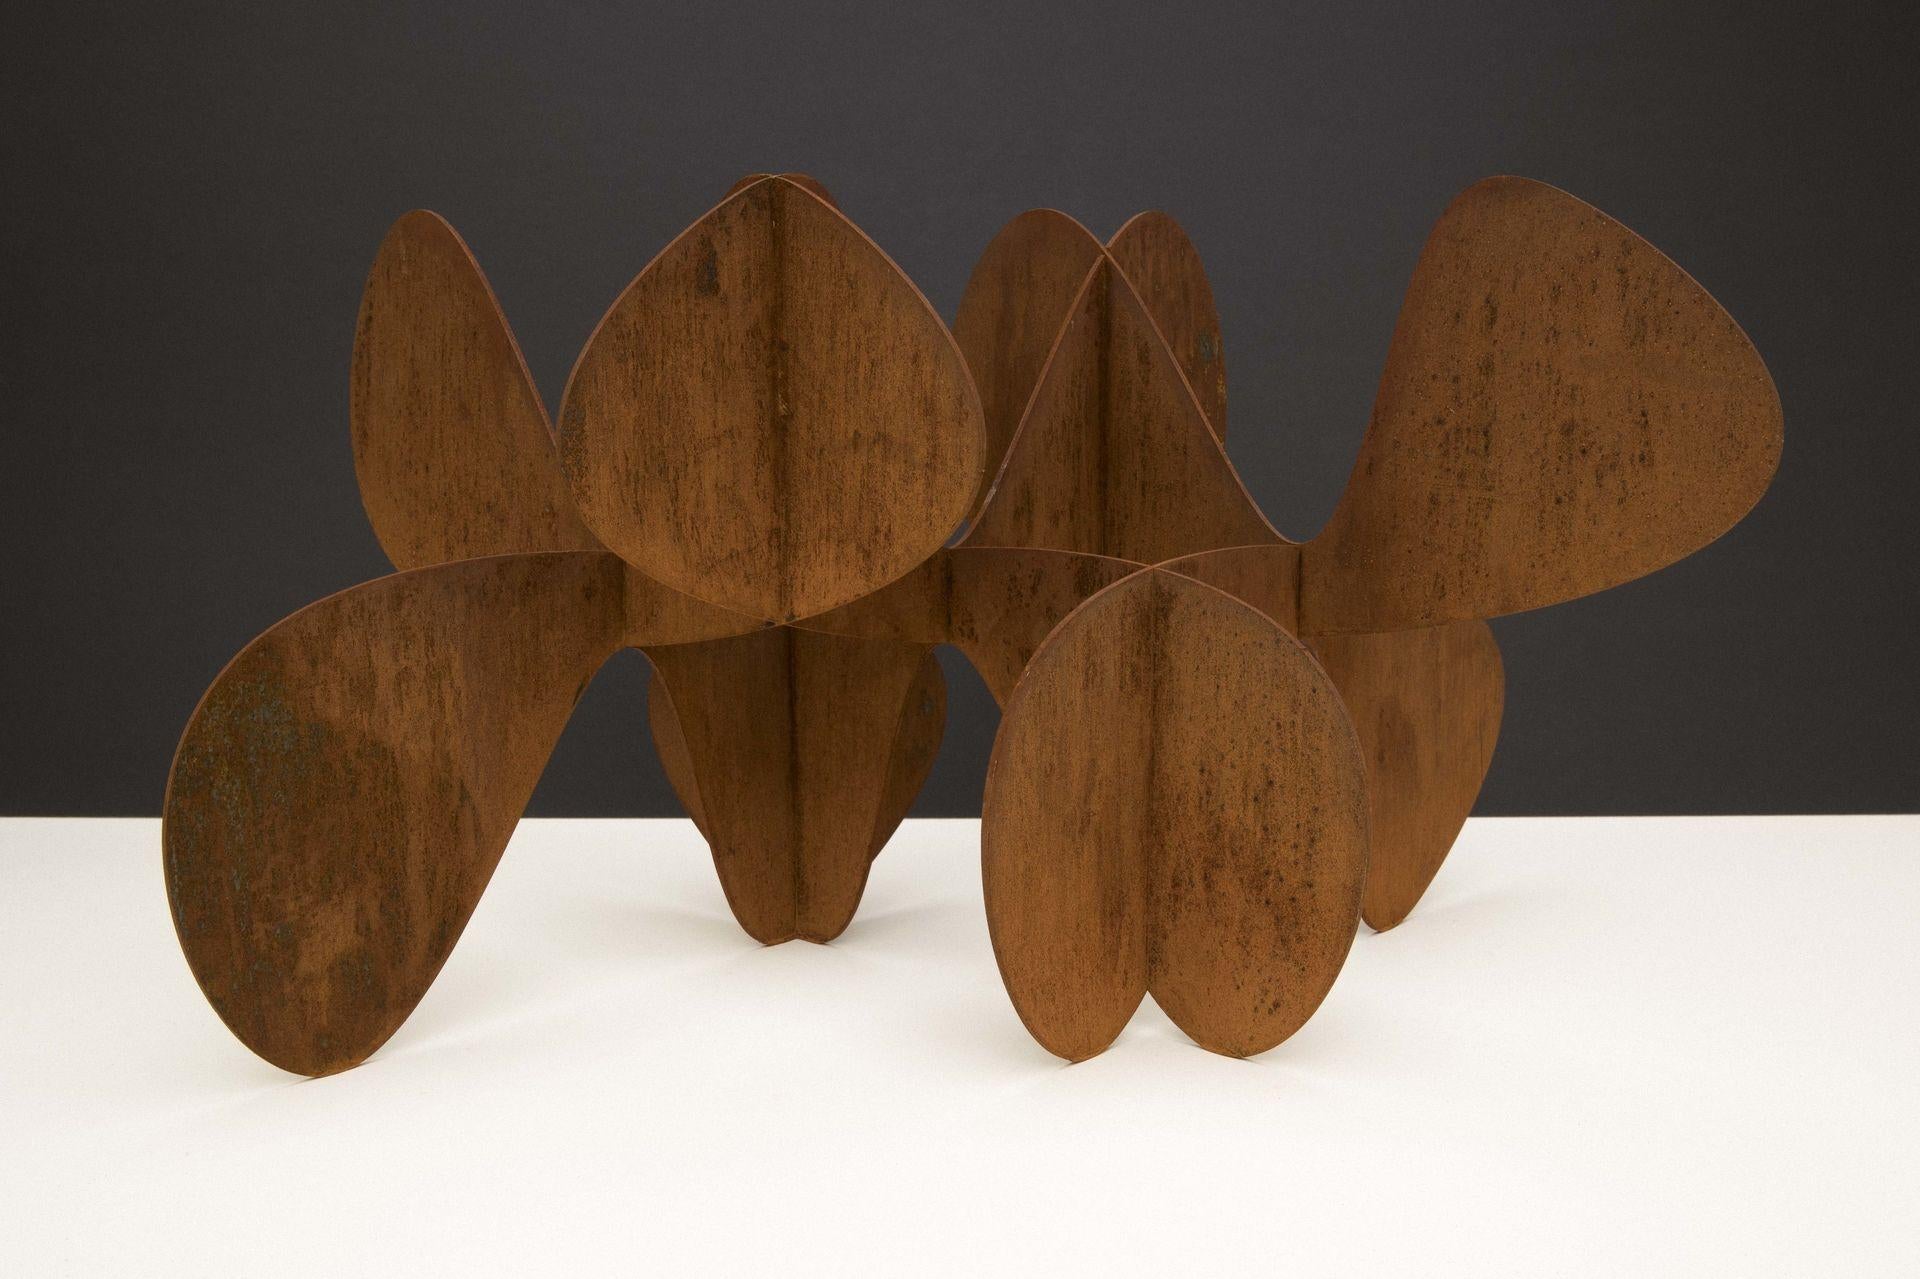 Barricada #1 ac S is a weathering steel sculpture by contemporary artist Alejandro Vega Beuvrin, dimensions are 27 × 53 × 30 cm (10.6 × 20.9 × 11.8 in). 
The sculpture is signed and numbered, it is part of a limited edition of 5 editions + 3